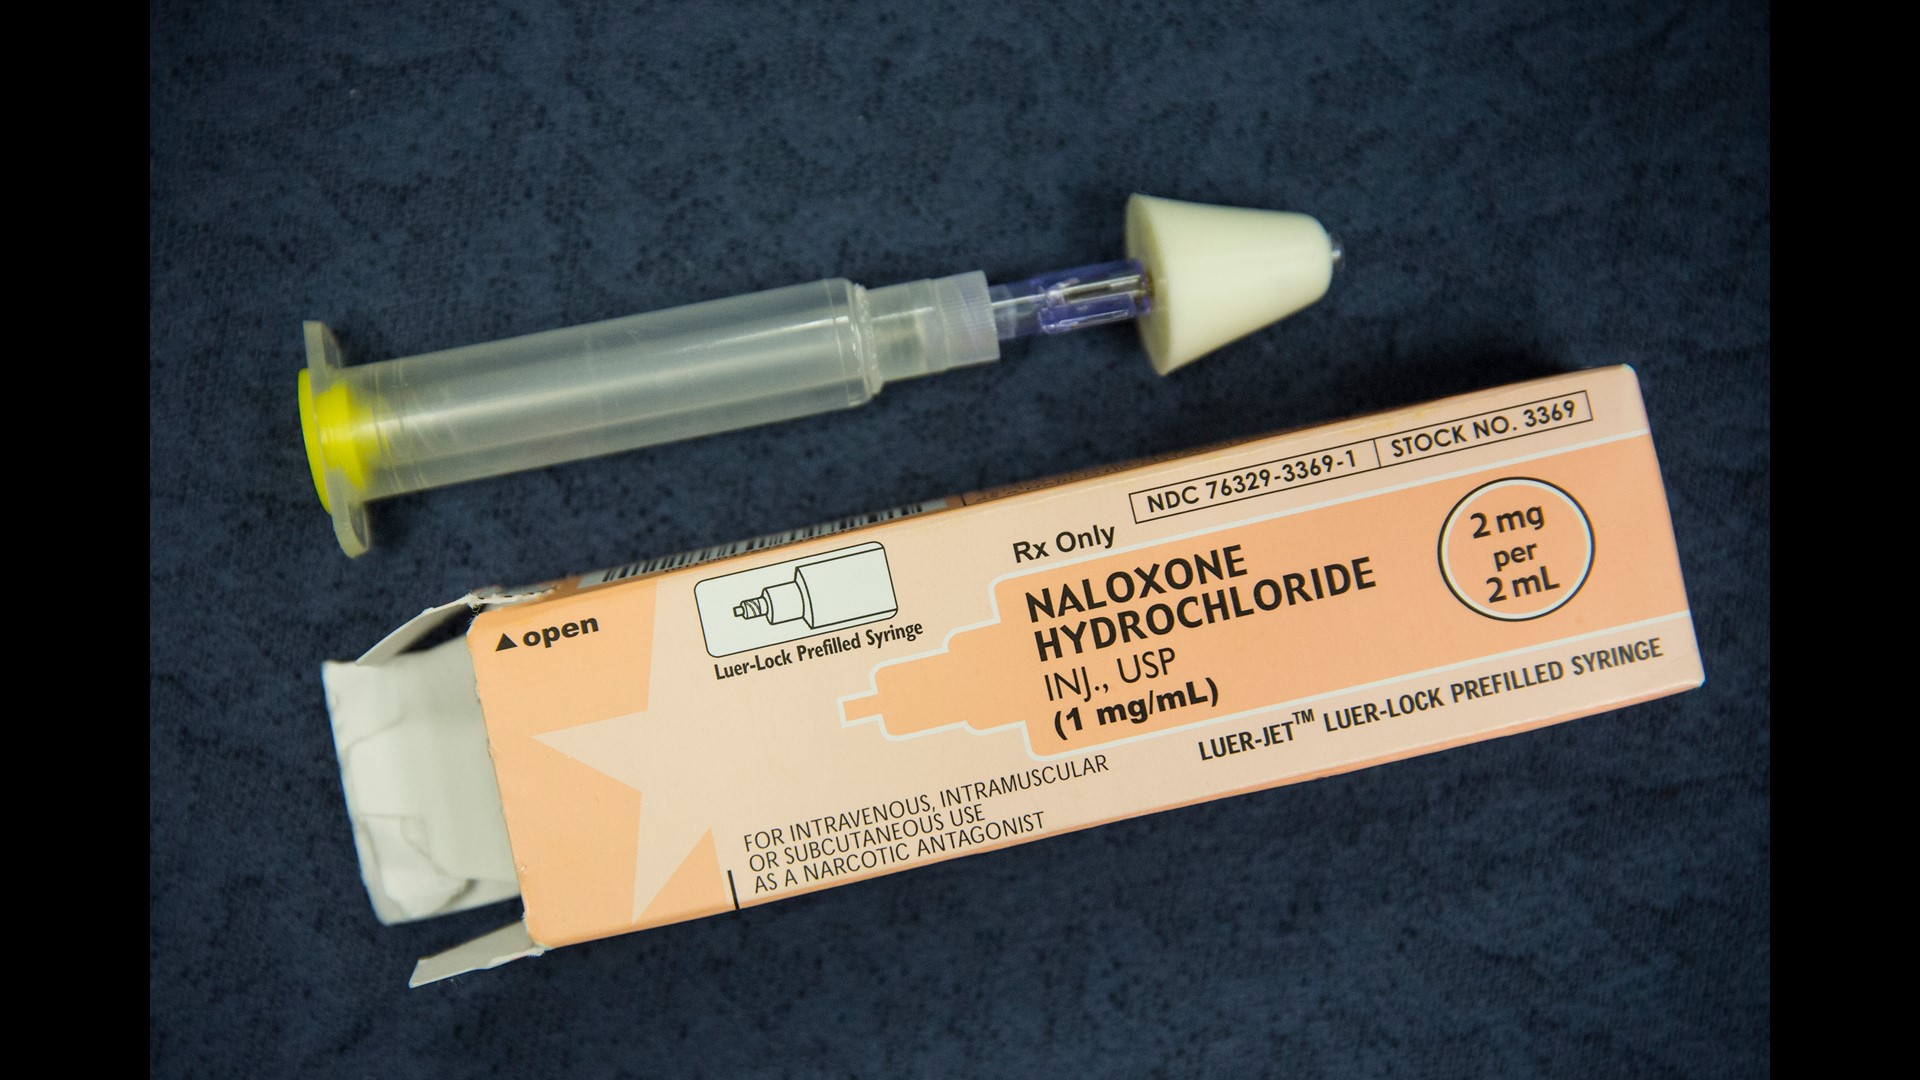 The DC Department of Health now offering Narcan to District residents - for free. The powerful drug is used to reverse the effects of an opioid overdose. Advocates hope it will help curb the crisis ravaging parts of the city.